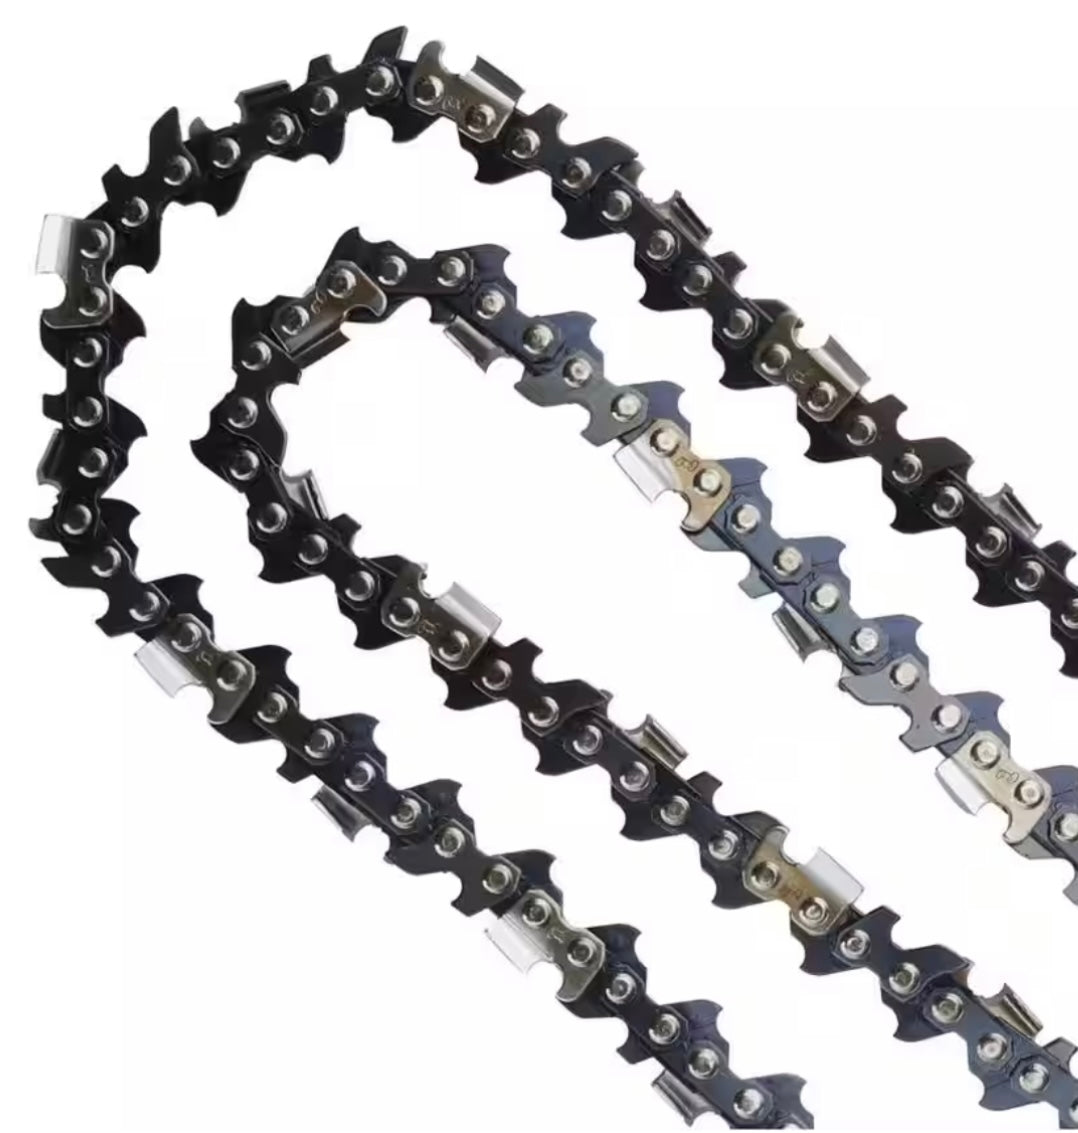 20 in. GC72 Full Chisel Chainsaw Chain